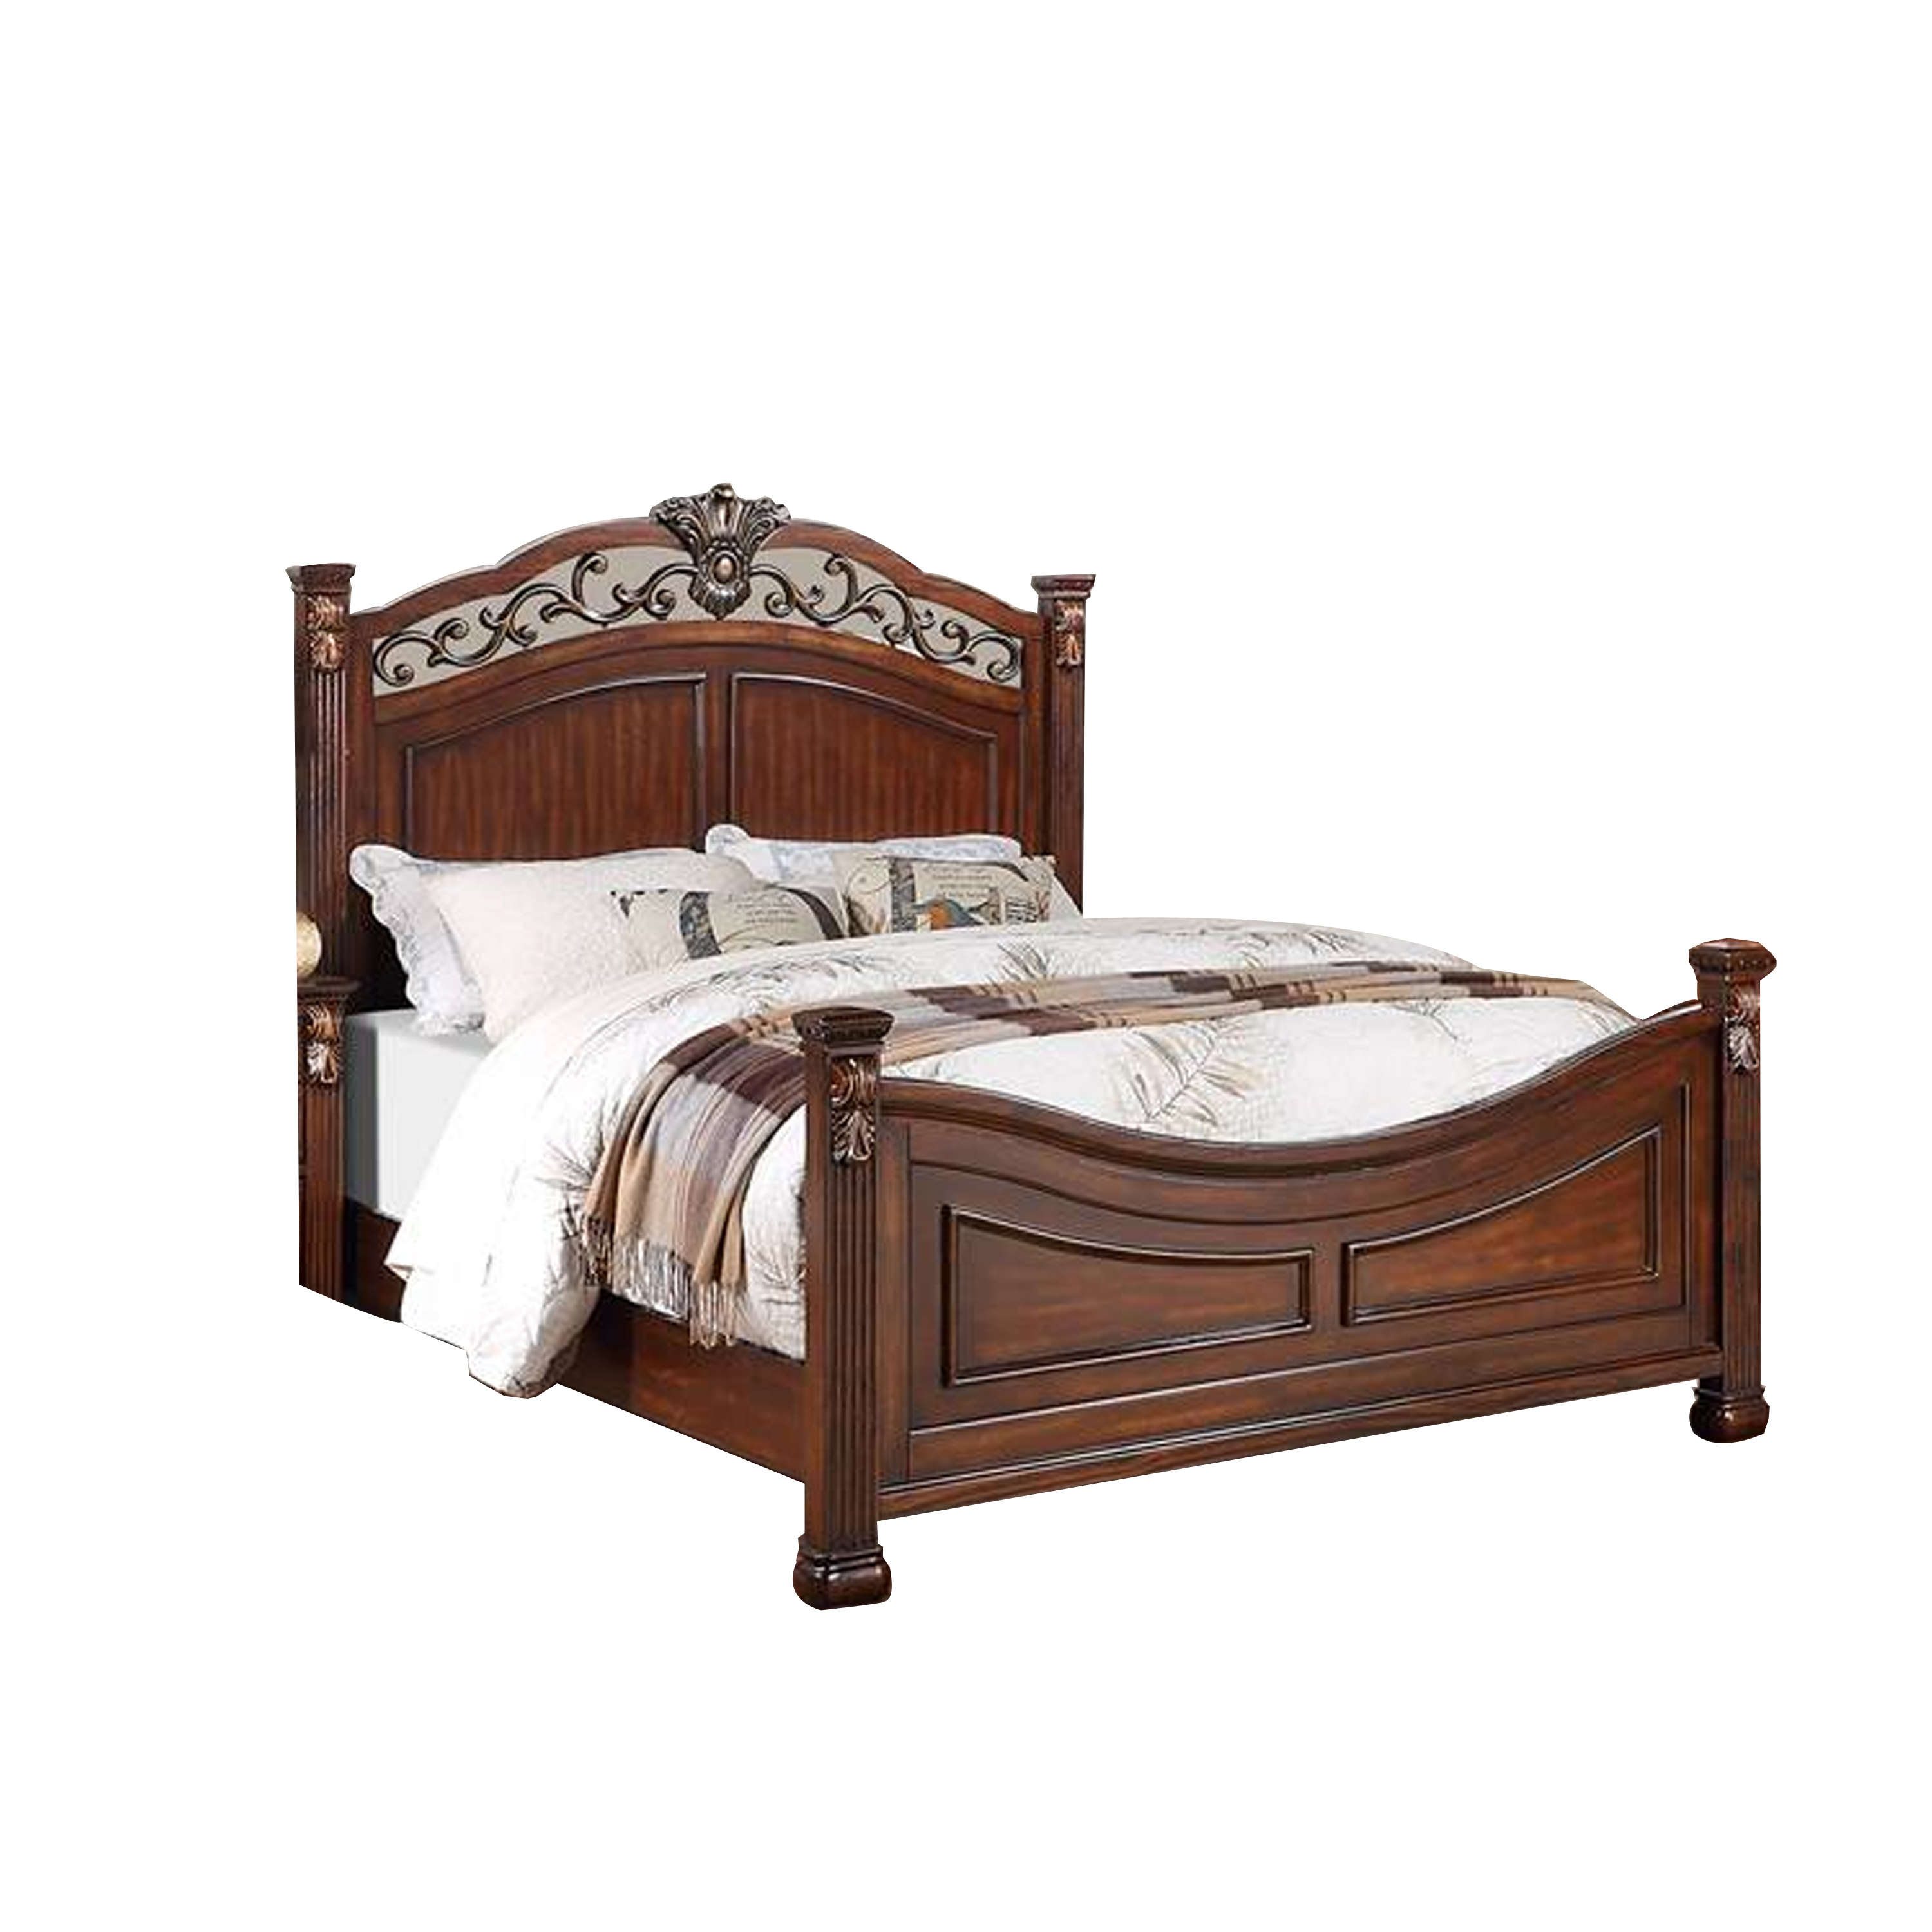 Aza Traditional Wood Queen Size Bed, Leaf Carvings, Rich Cherry Brown - Saltoro Sherpi